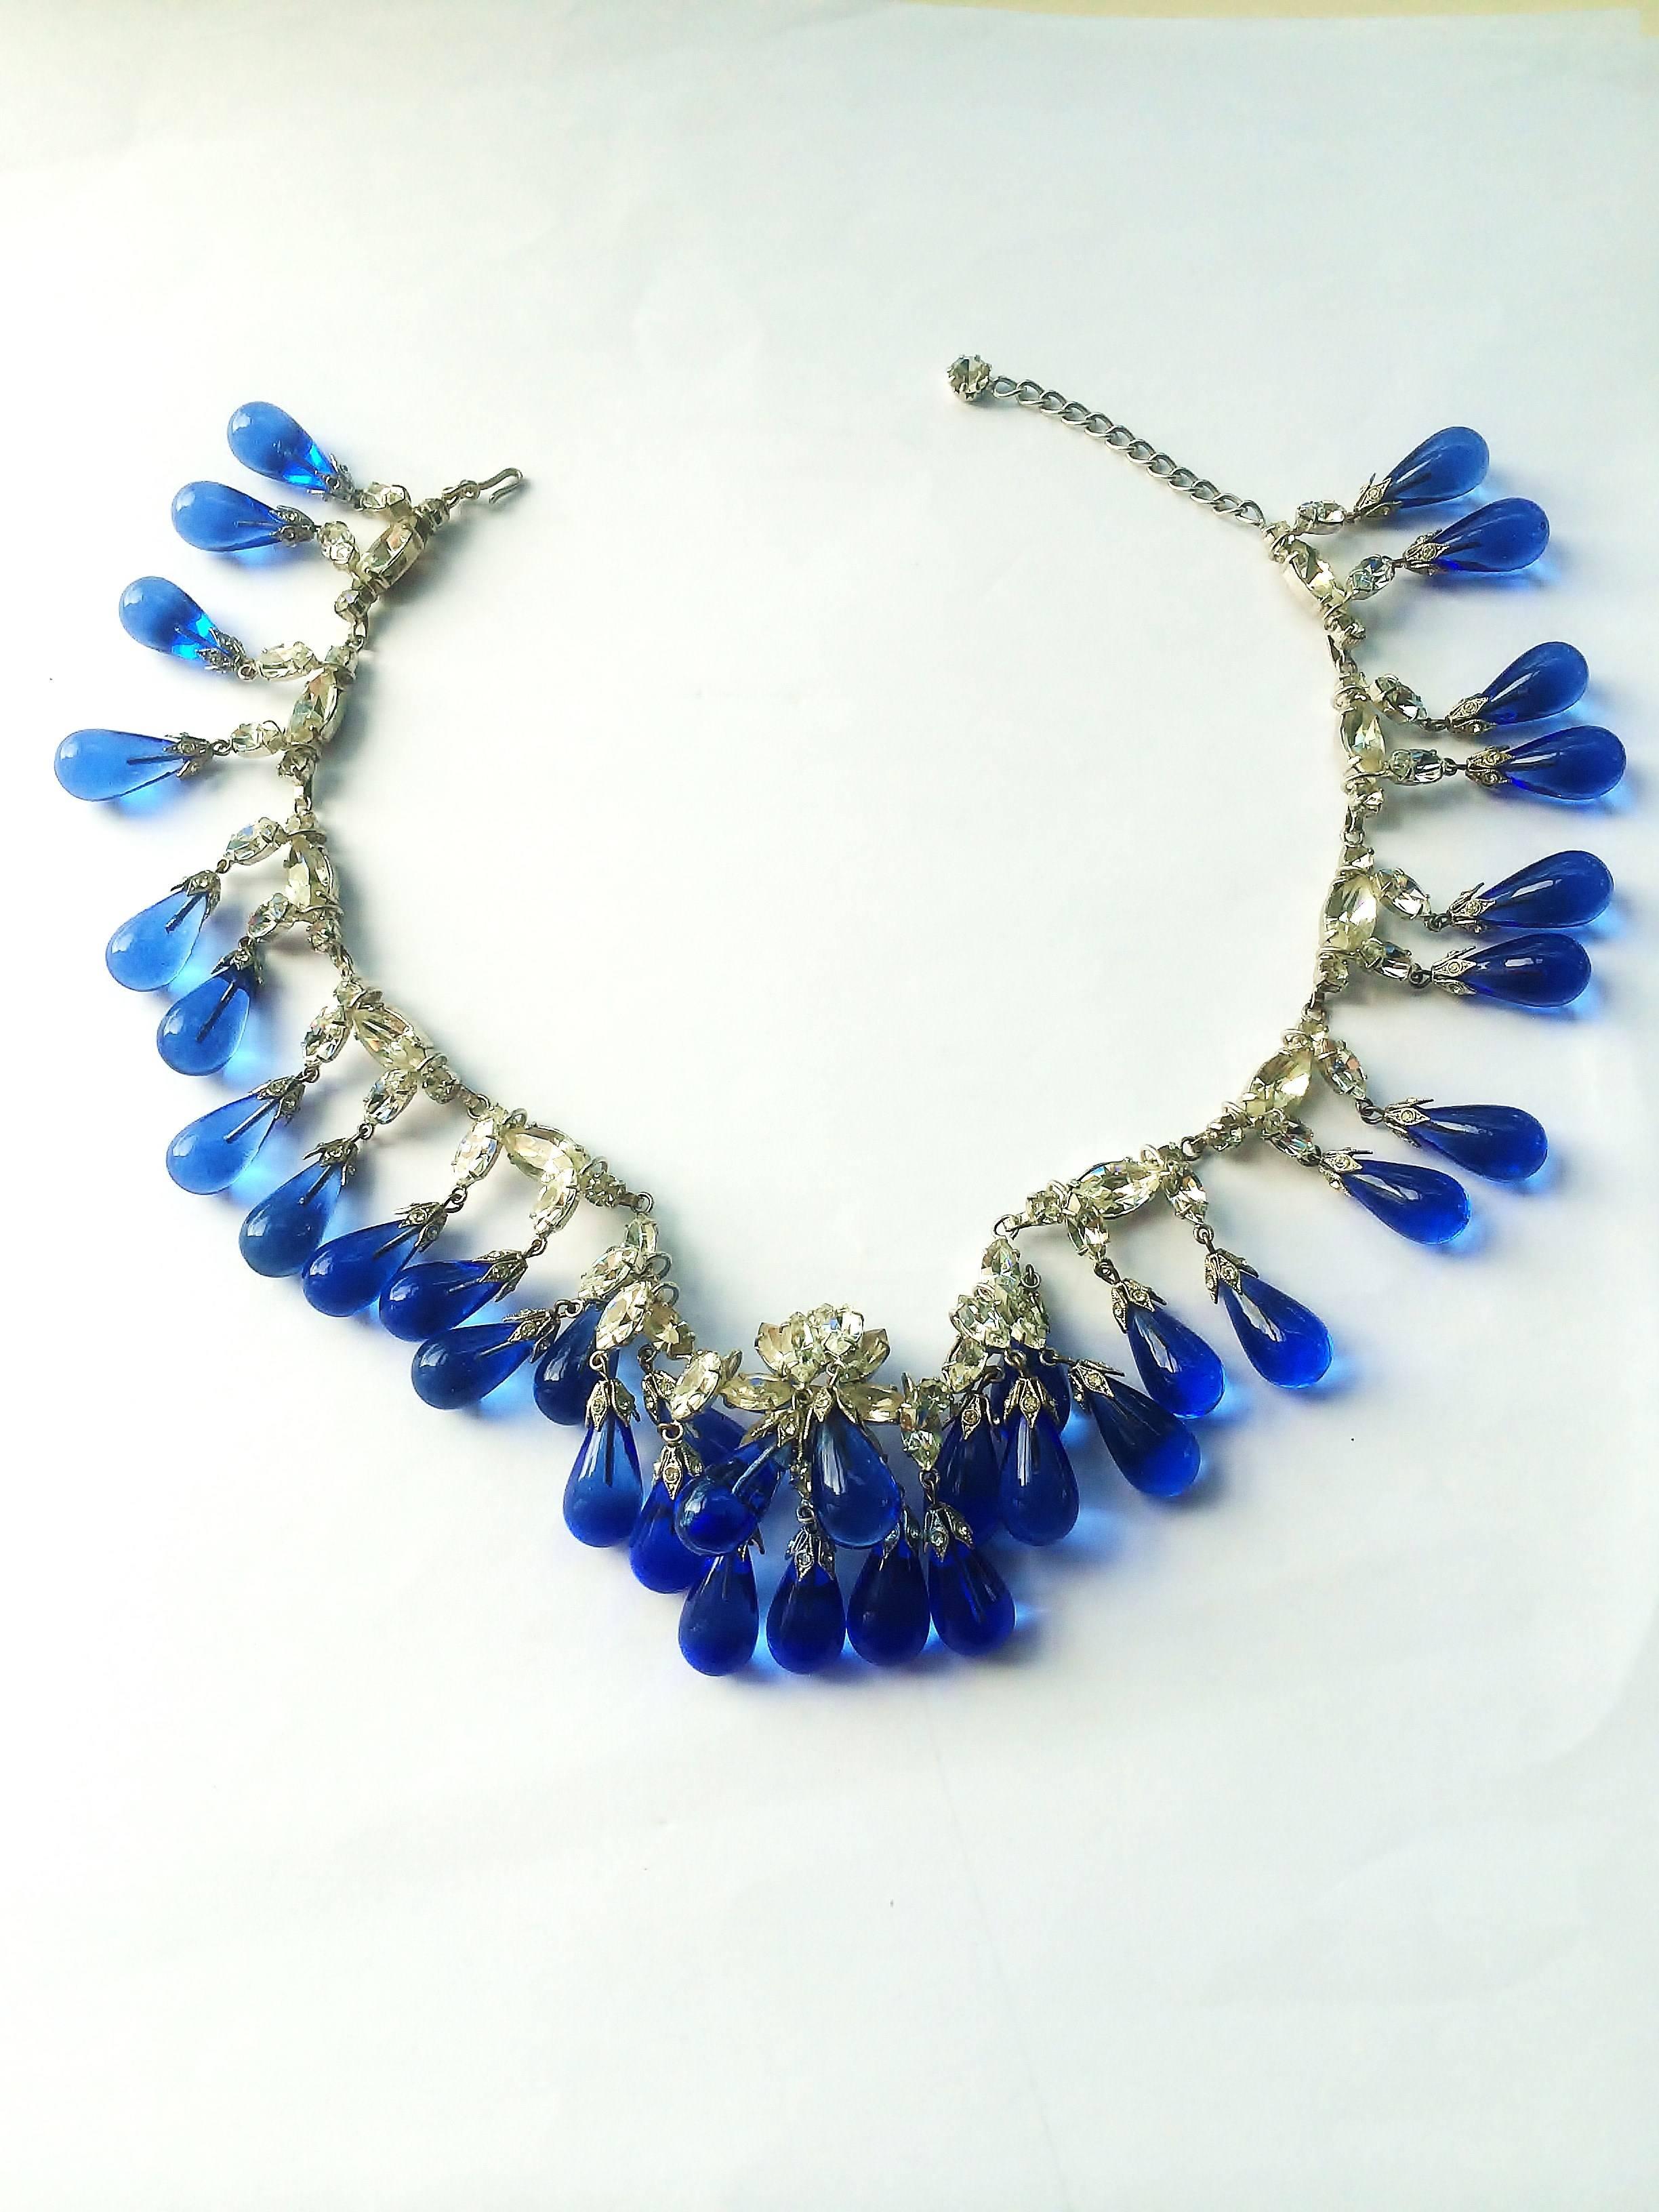 Women's Sapphire drop and paste necklace, att. Roger Scemama for Christian Dior, 1960s